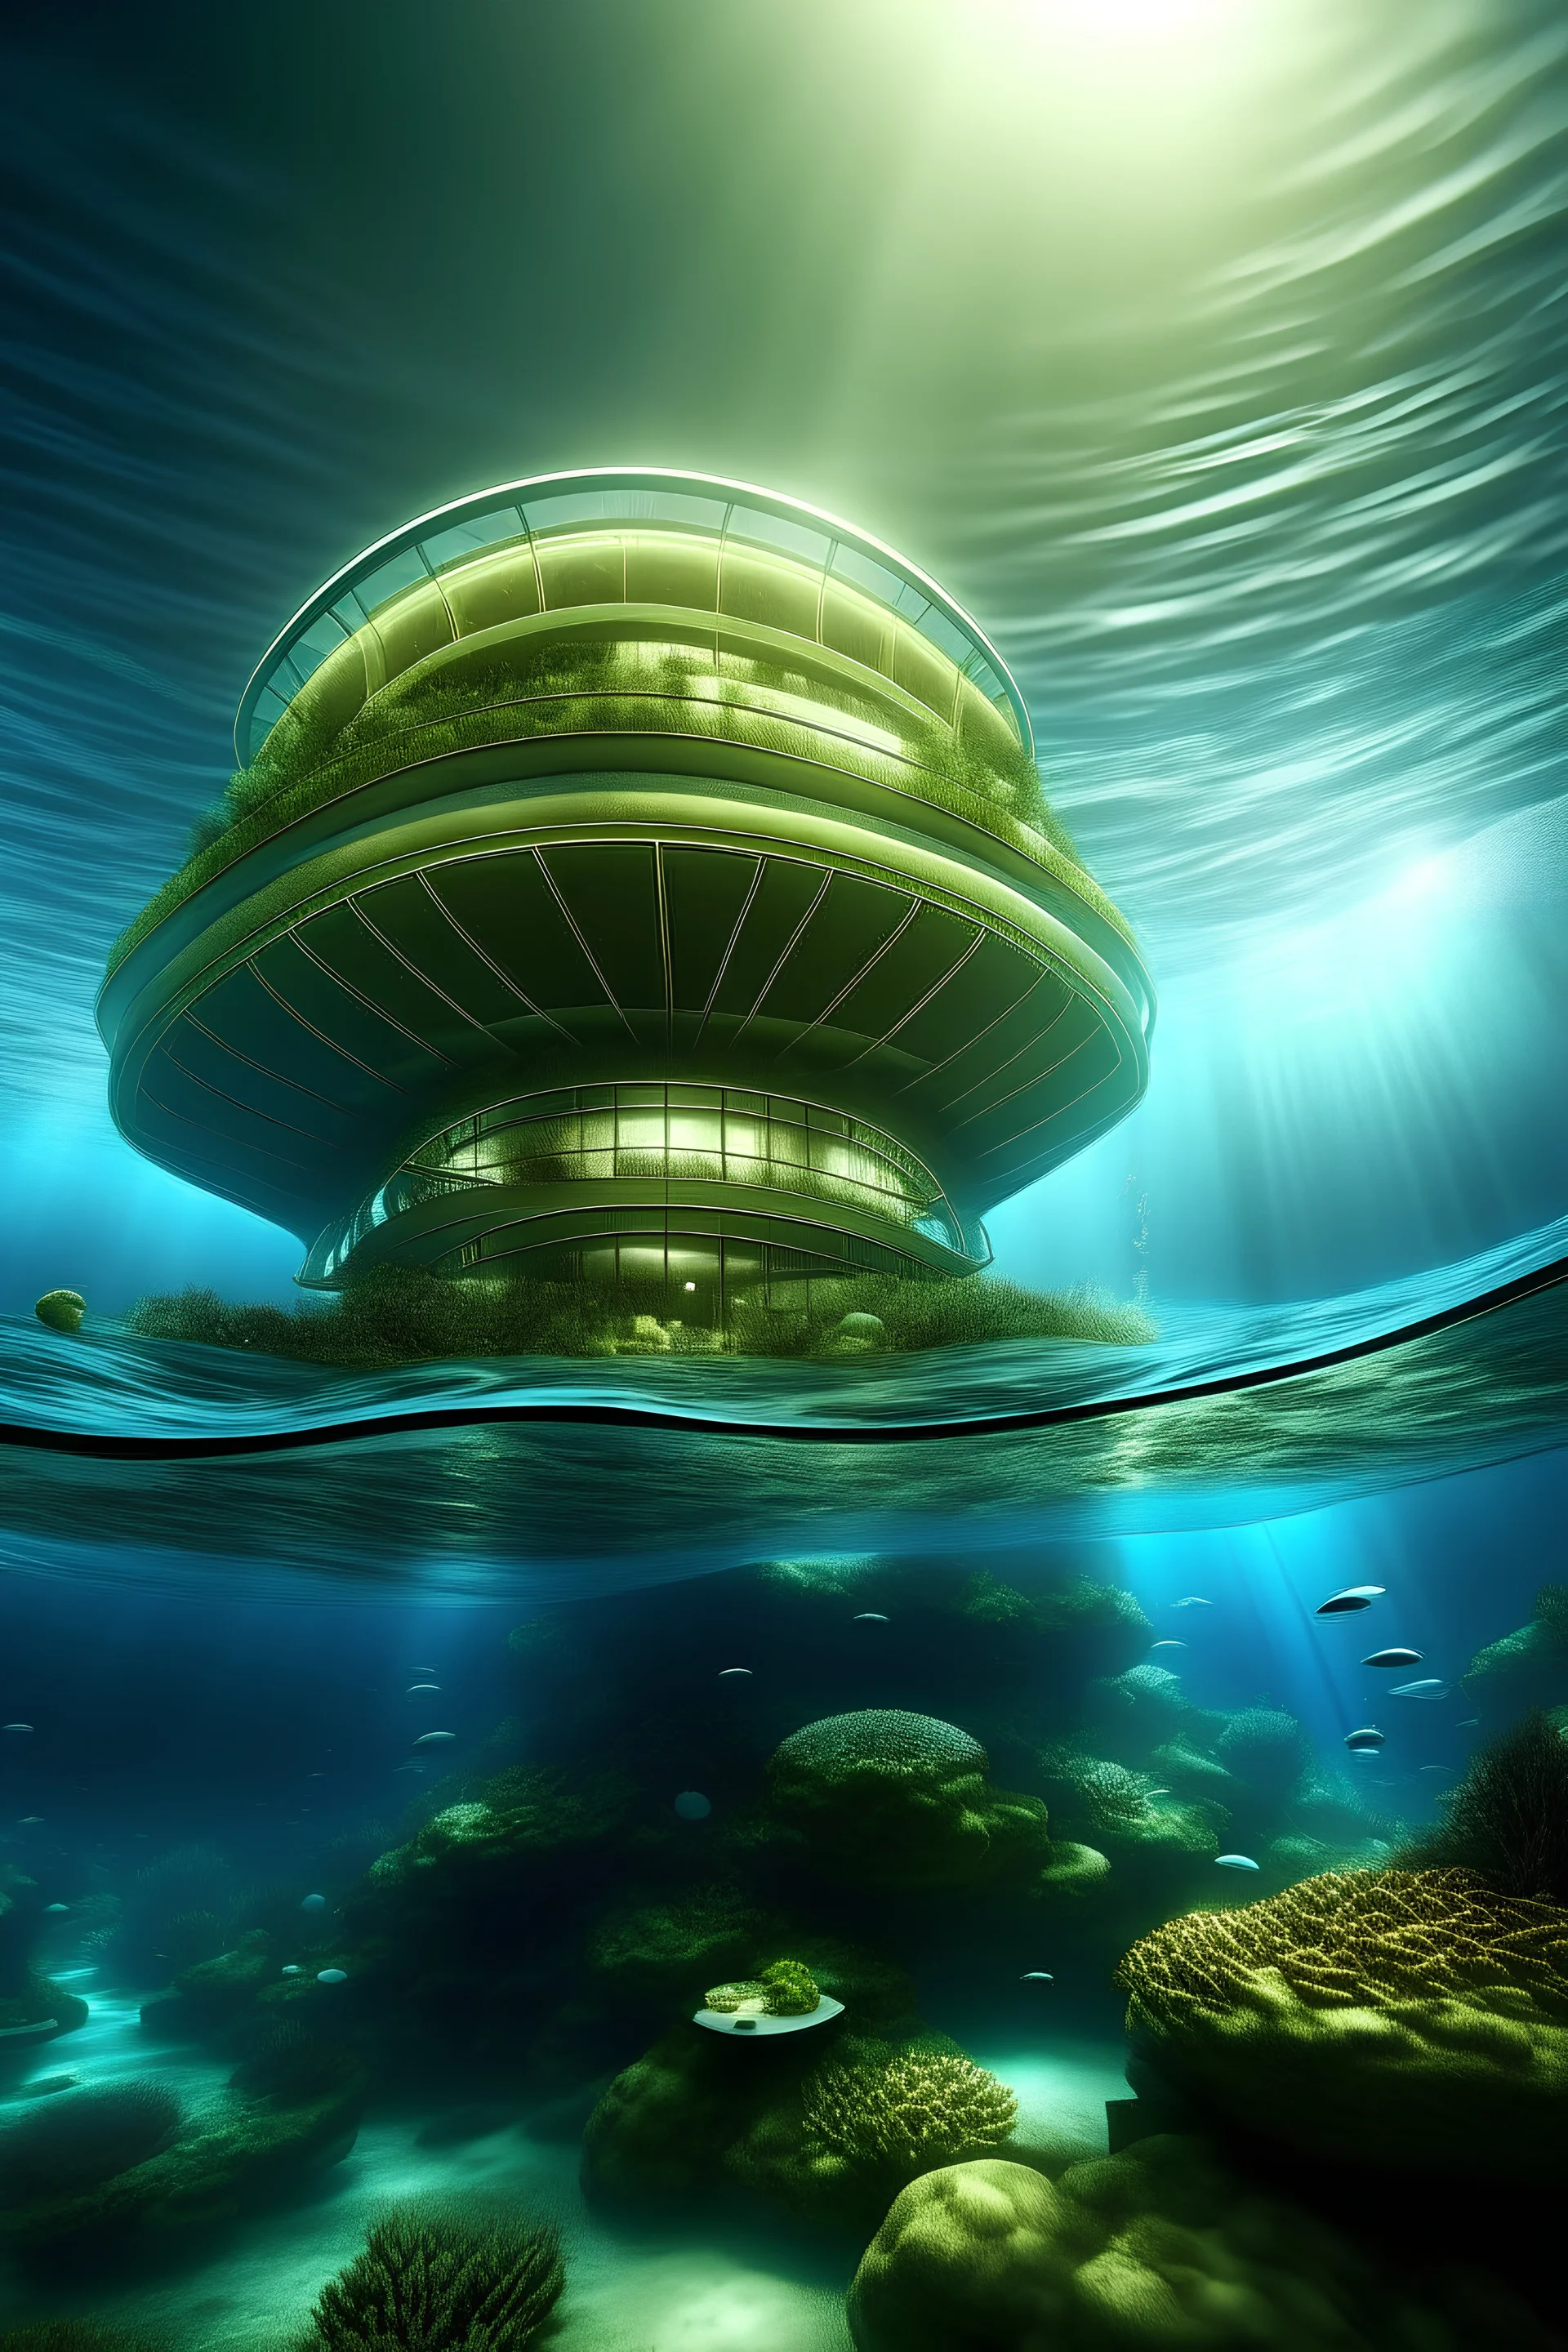 Envision a society beneath the sea, with unique architecture that harmonizes with ocean life. Think about how light, movement, and everyday activities would differ underwater.